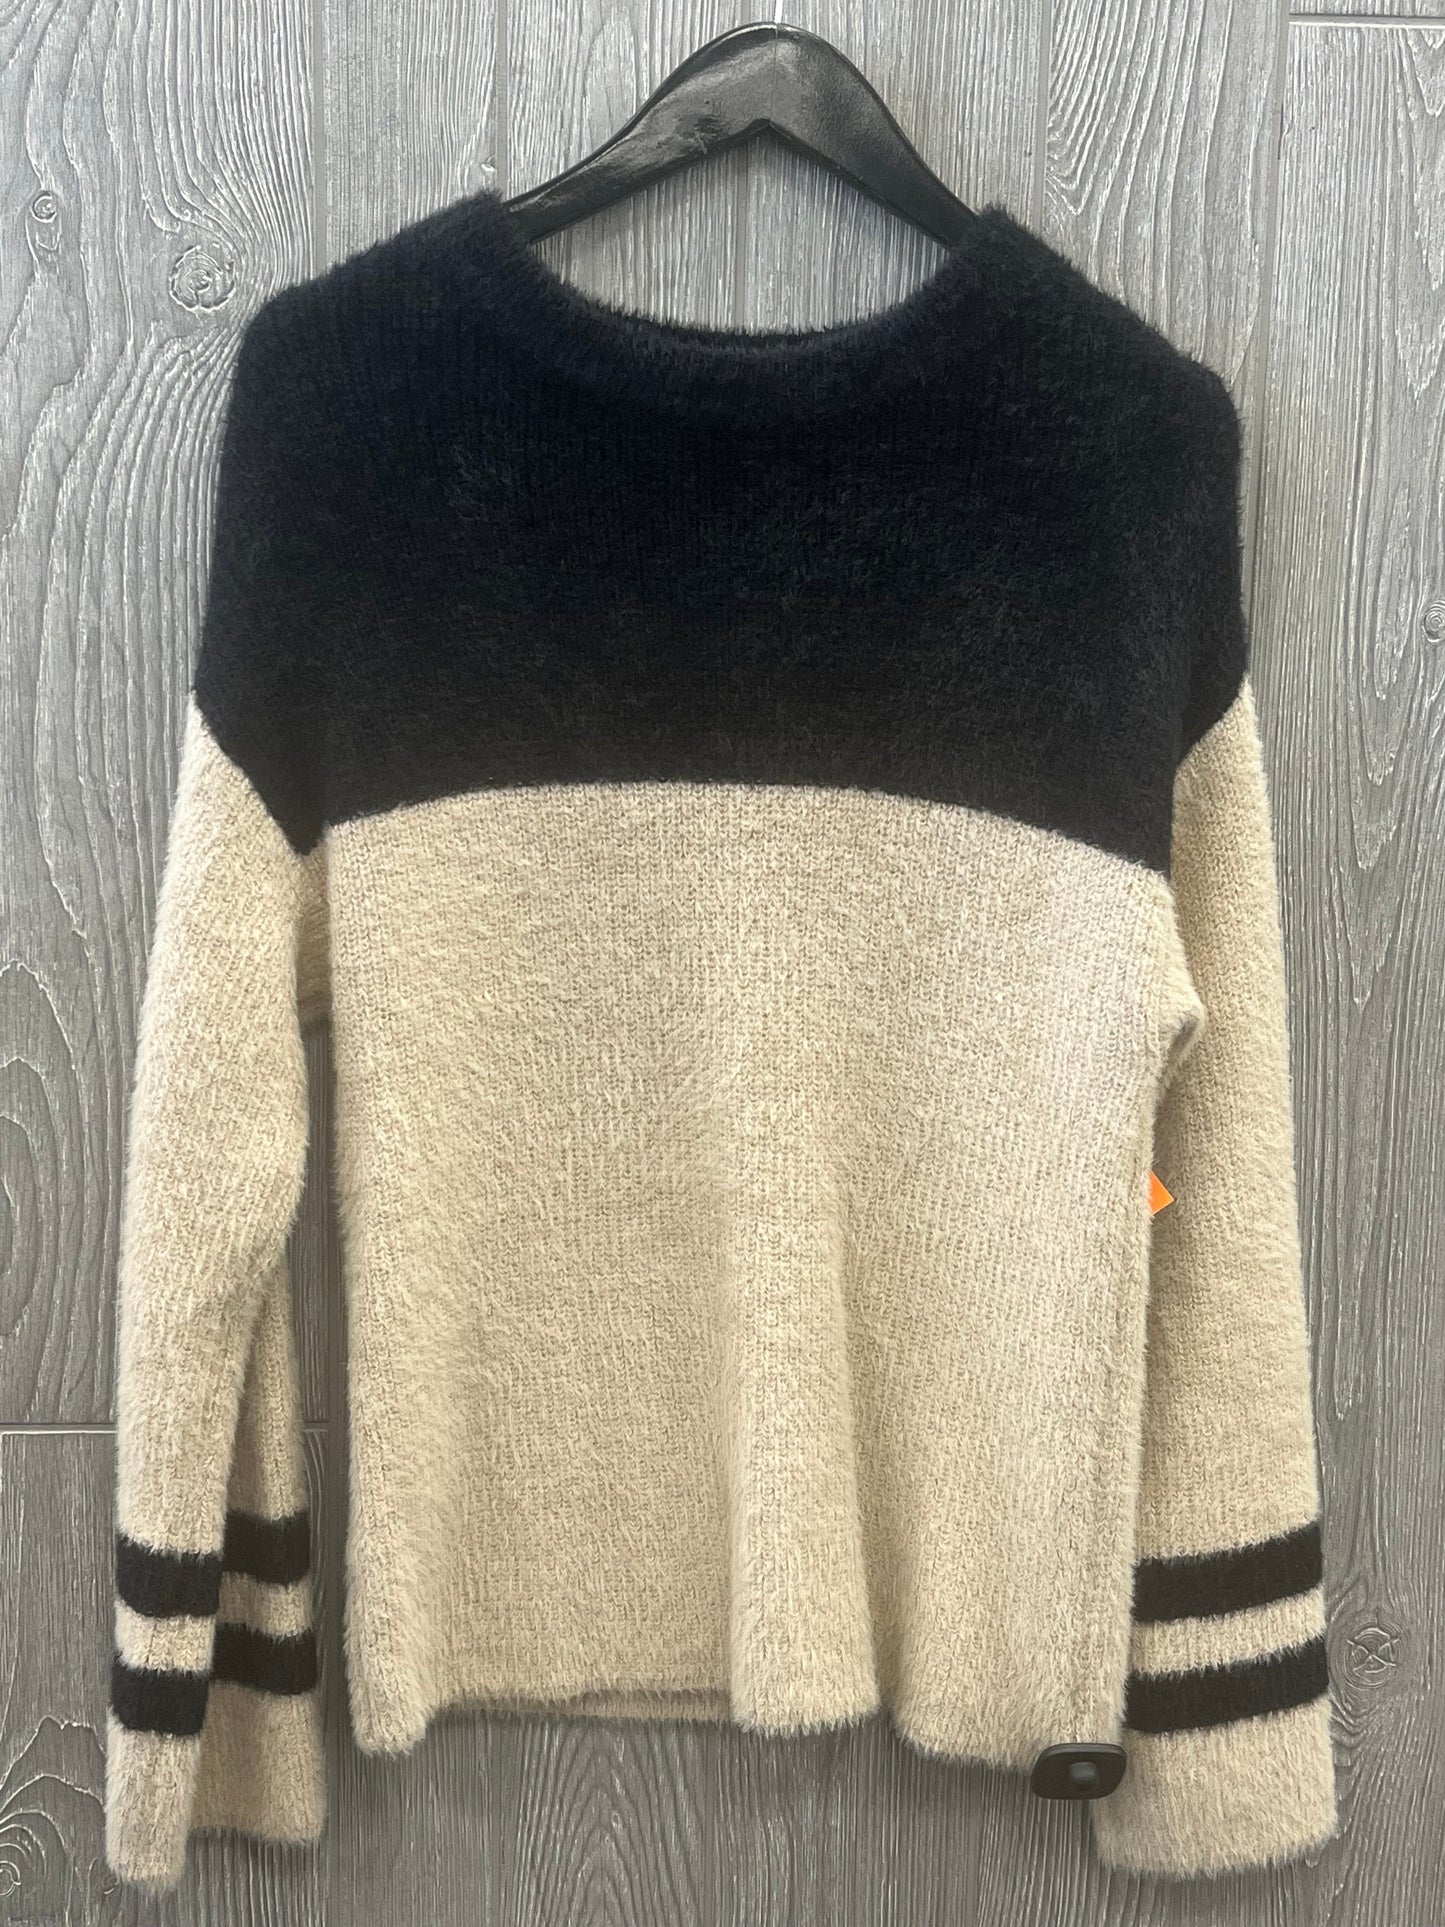 Sweater By Knox Rose  Size: Xs